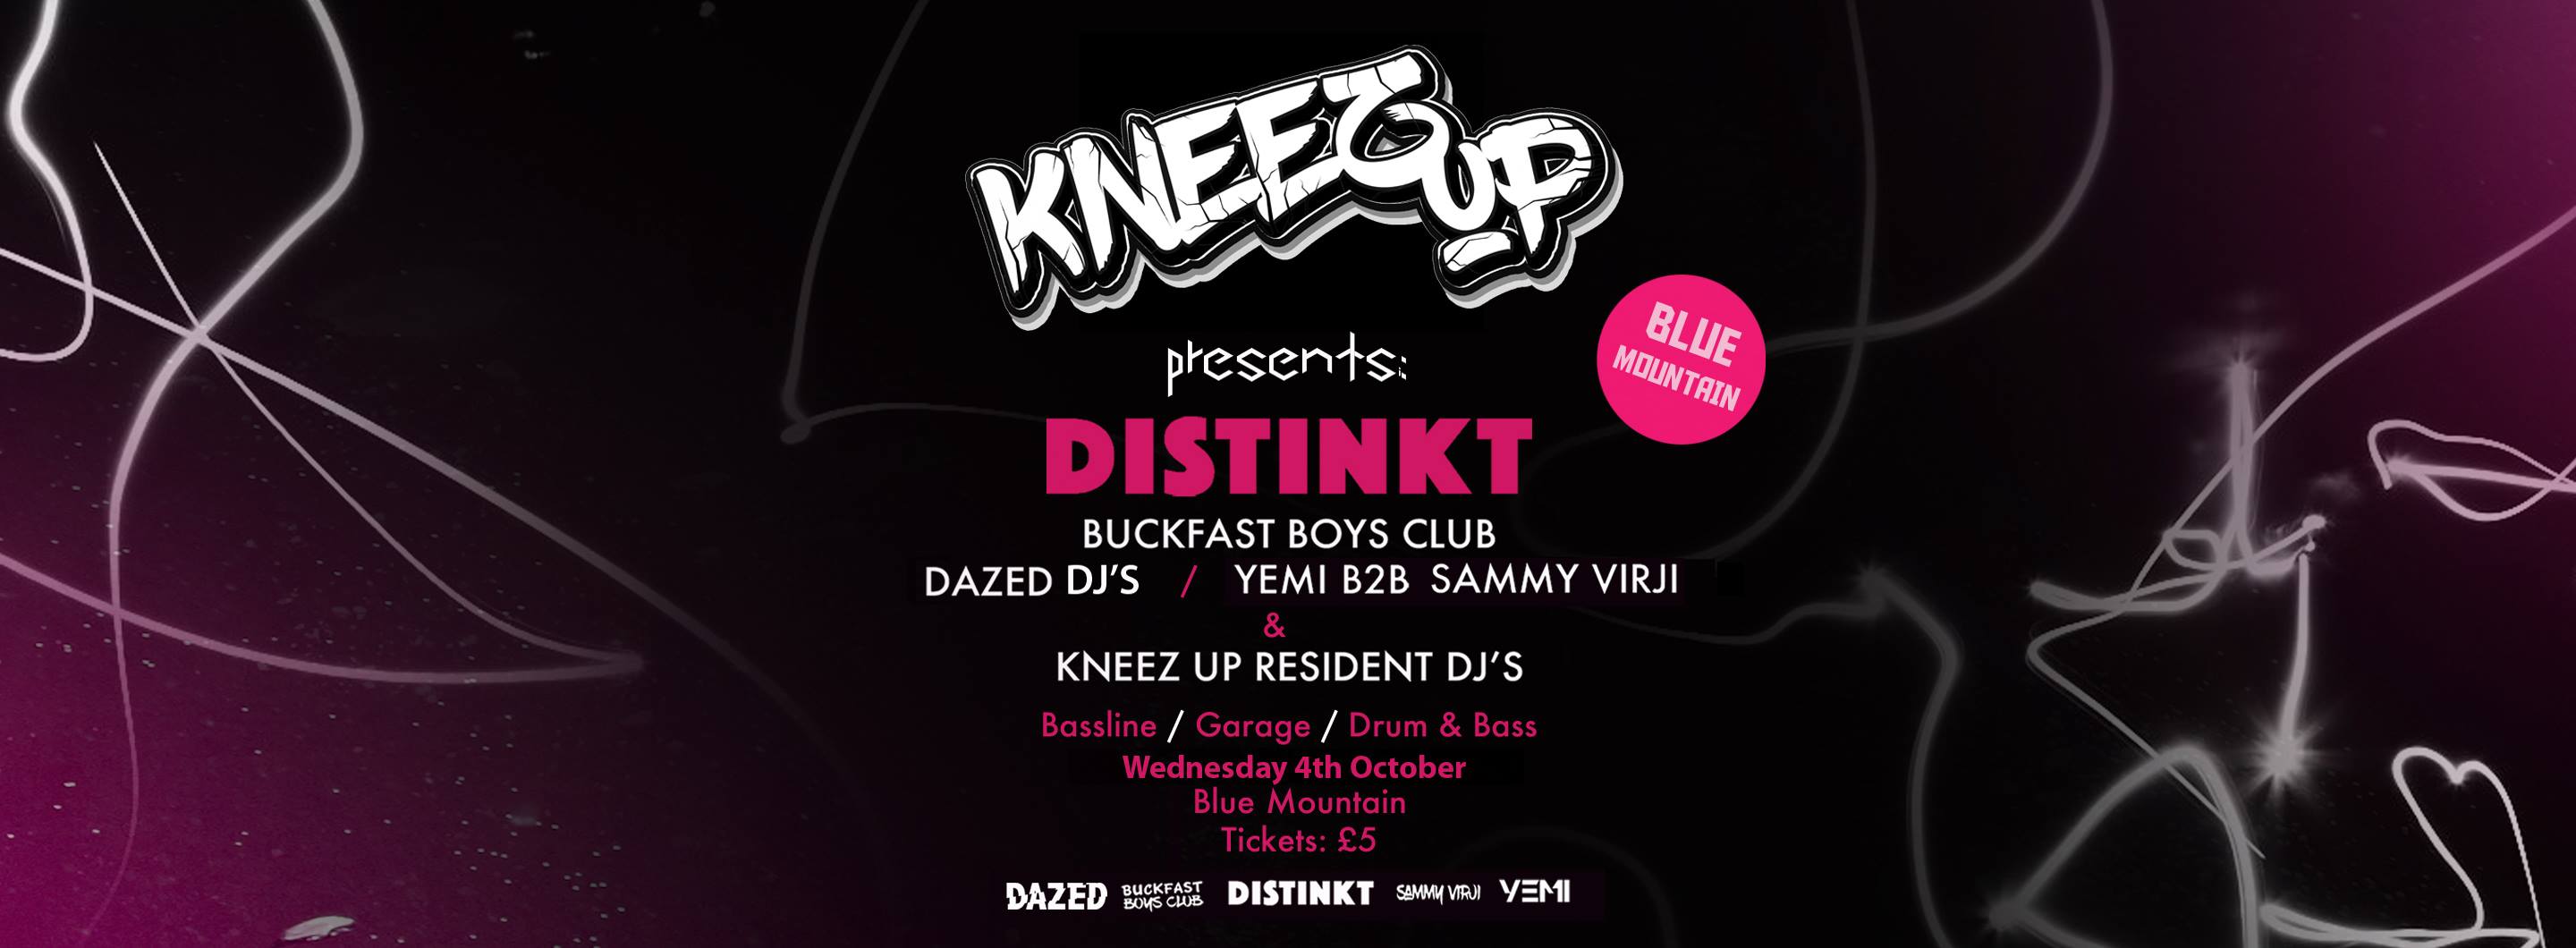 Pink and Blue Mountain Logo - Kneez Up Presents: Distinkt at Blue Mountain! – Blue Mountain Club